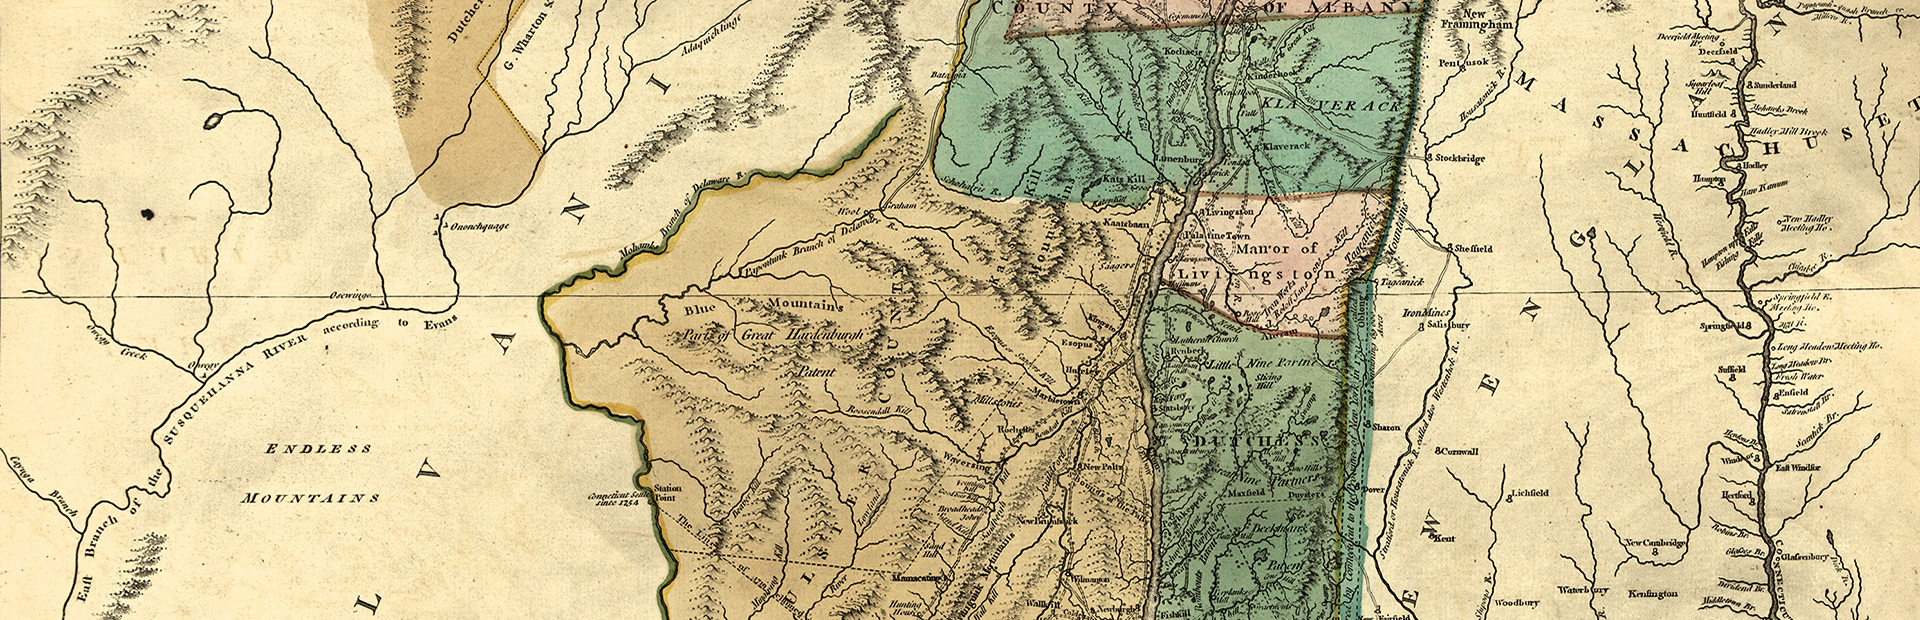 Detail of Hudson River Valley Map